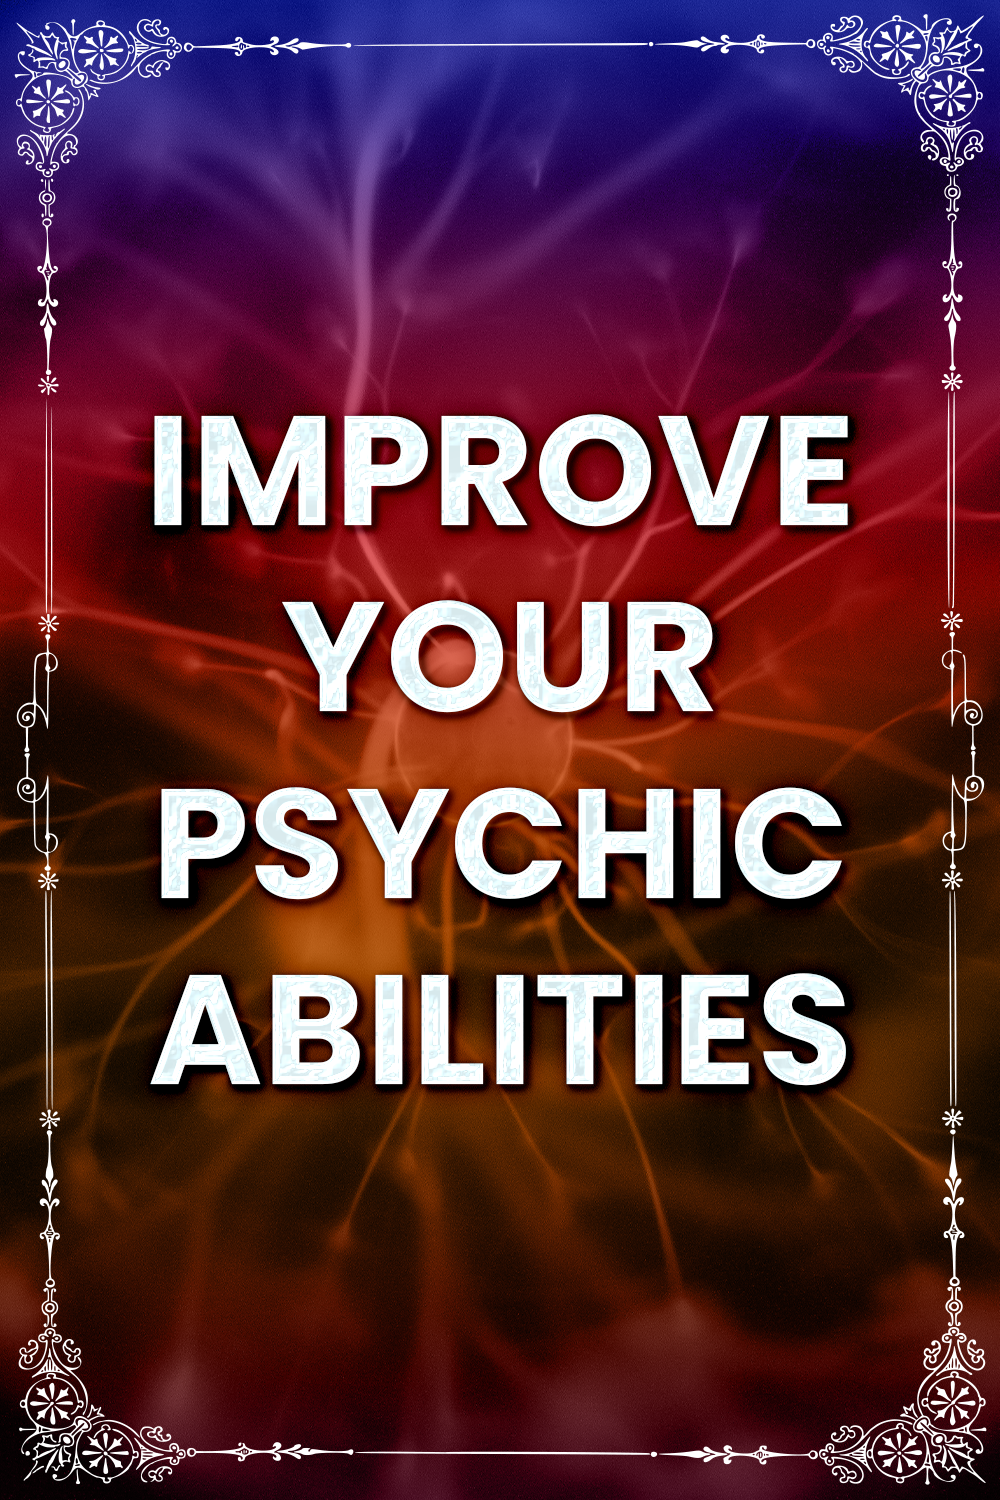 How to Develop Psychic Abilities in Five Steps?